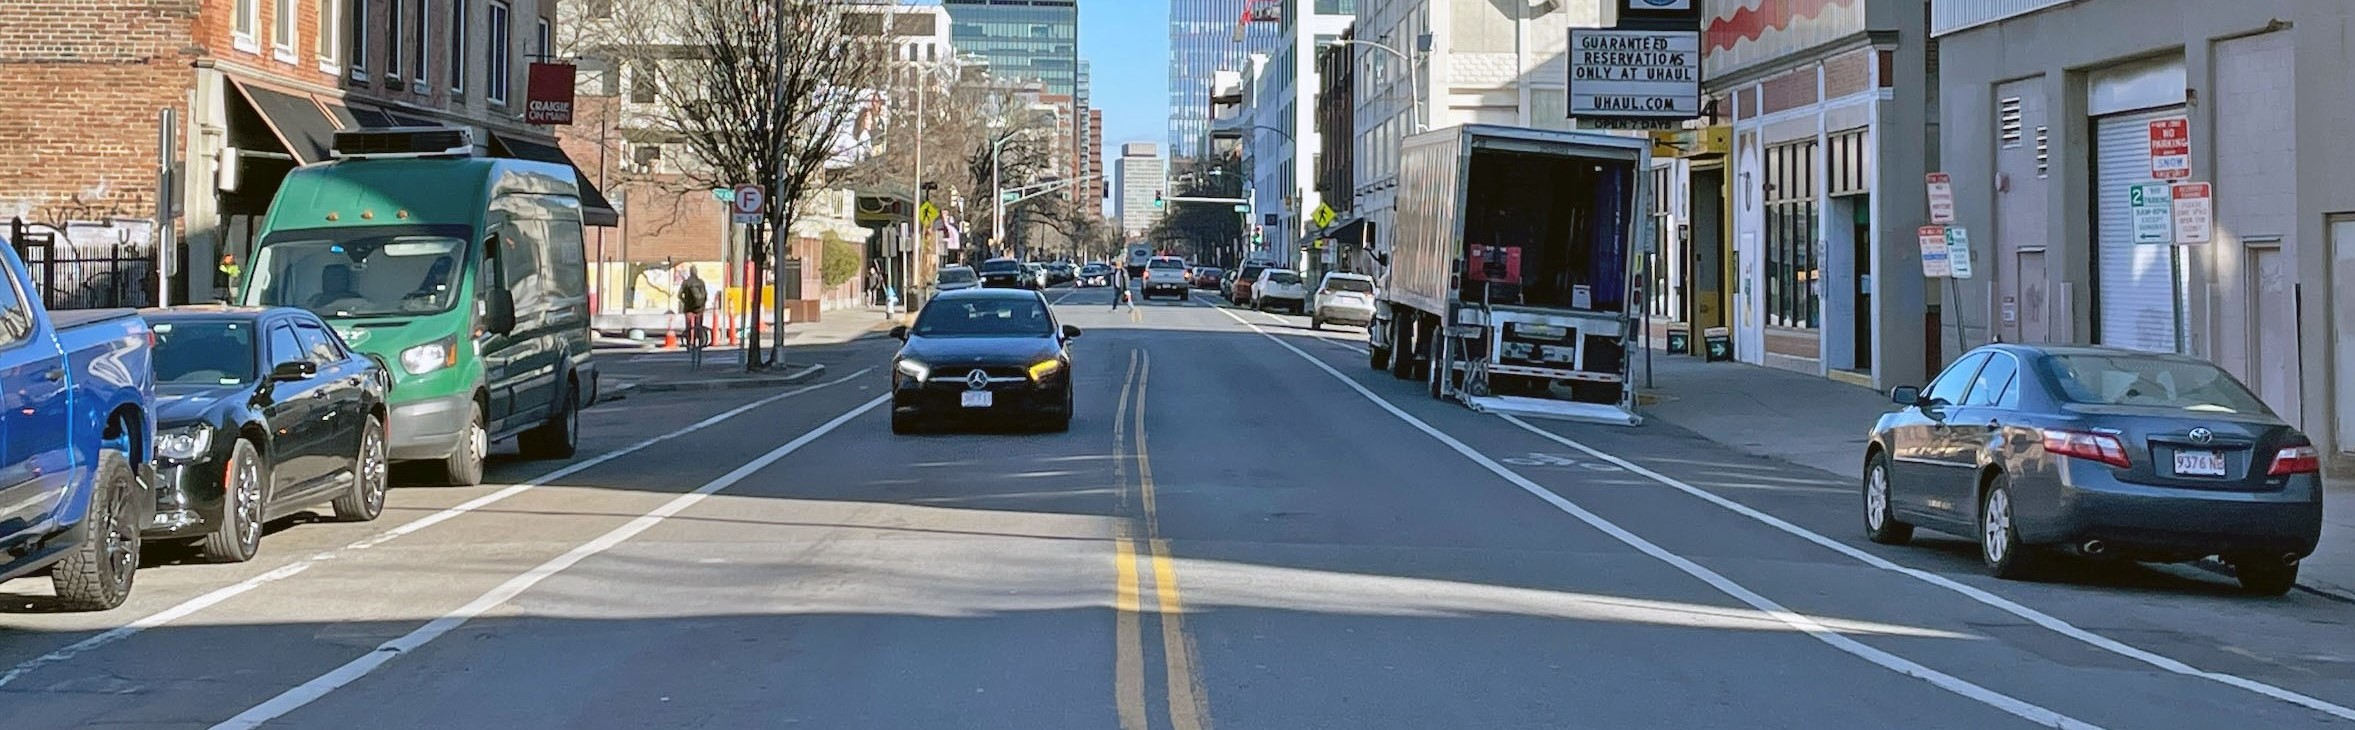 A view of Main Street in Cambridge shows a UHaul storefront with a moving truck parked out front, several cars on the road, and a pedestrian crossing in the background. Tere are traditional bike lanes in both directions.